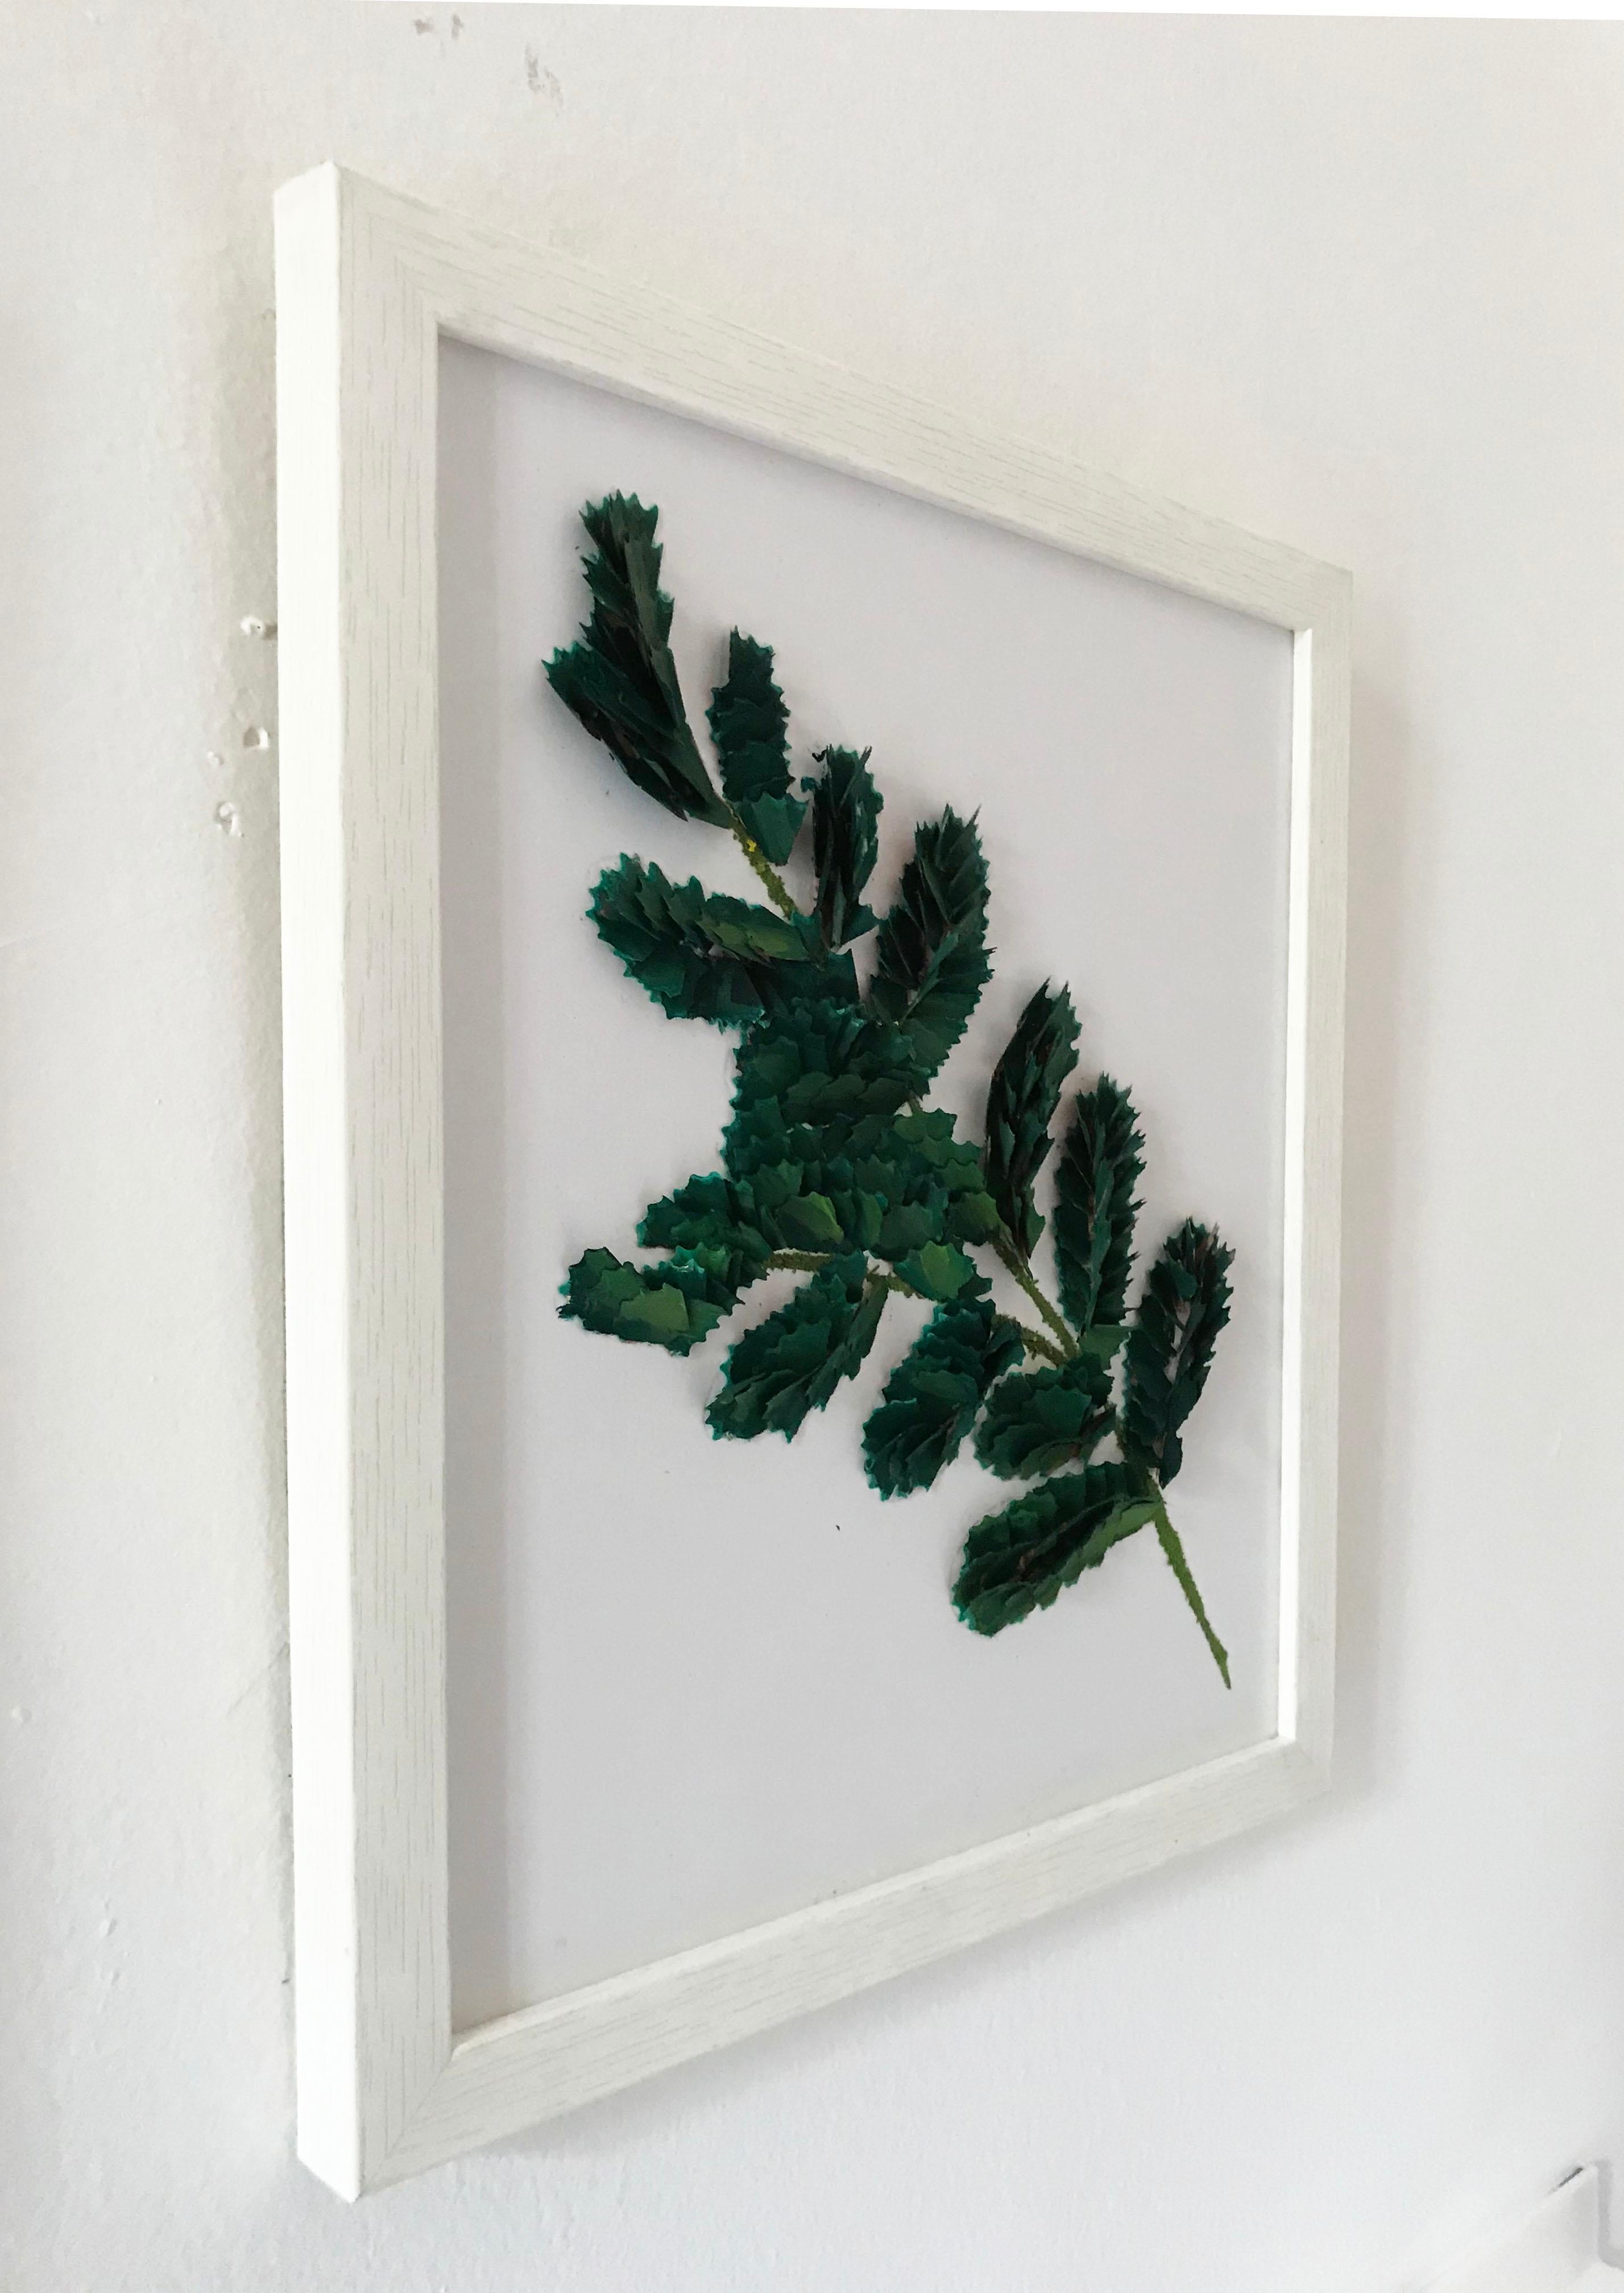 An elegant and detailed art work, perfect for decorating minimalistic spaces. The two colors: white and green give a serene look to the place. 

These three pieces were done delicately with pencil wood chips. Each piece was placed upon its